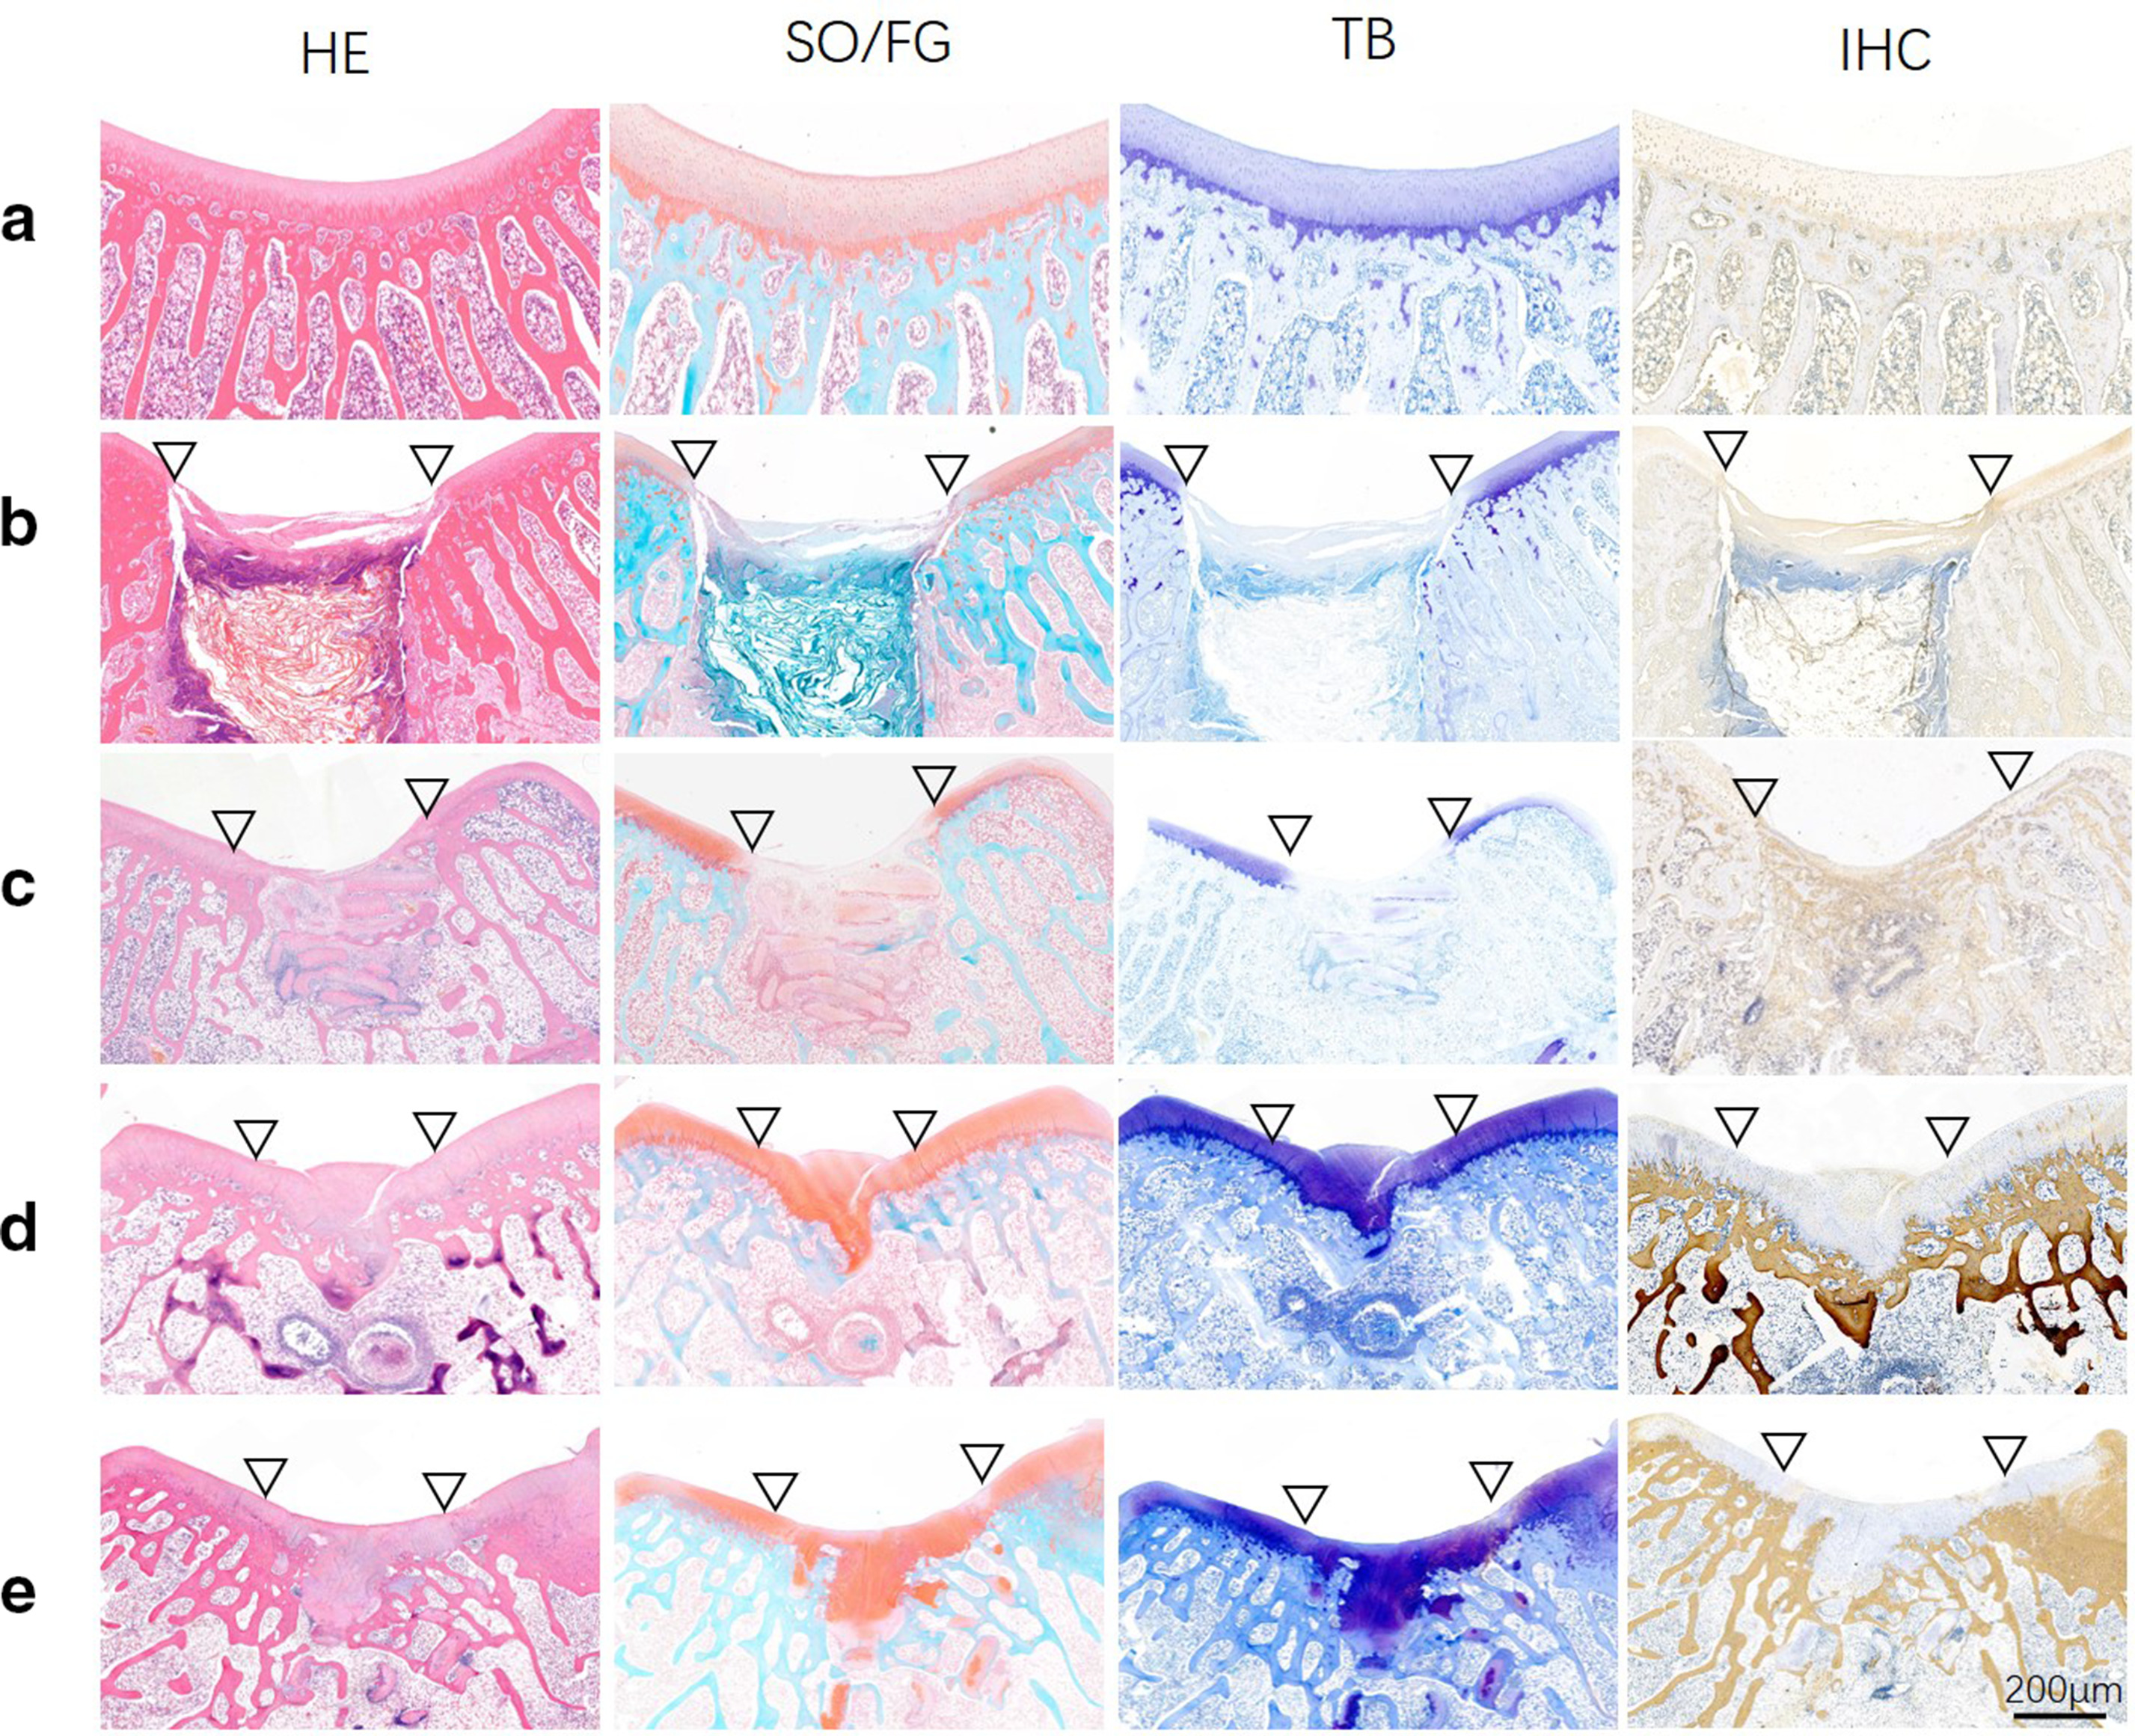 Fig. 10 
            Histological assessment of regenerated tissue in all groups at 12 weeks after surgery (n = 5). ∇: boundary of defects. a) Normal group. b) Control group. c) Juvenile cartilage fragments (JCFs) group. d) Human acellular amniotic membrane (HAAM) group. e) HAAM + JCFs group. HE, haematoxylin and eosin; IHC, immunohistochemical staining; SO/FG, Safranin O/Fast Green staining; TB, toluidine blue staining of type II collagen. Scale bar: 200 μm.
          